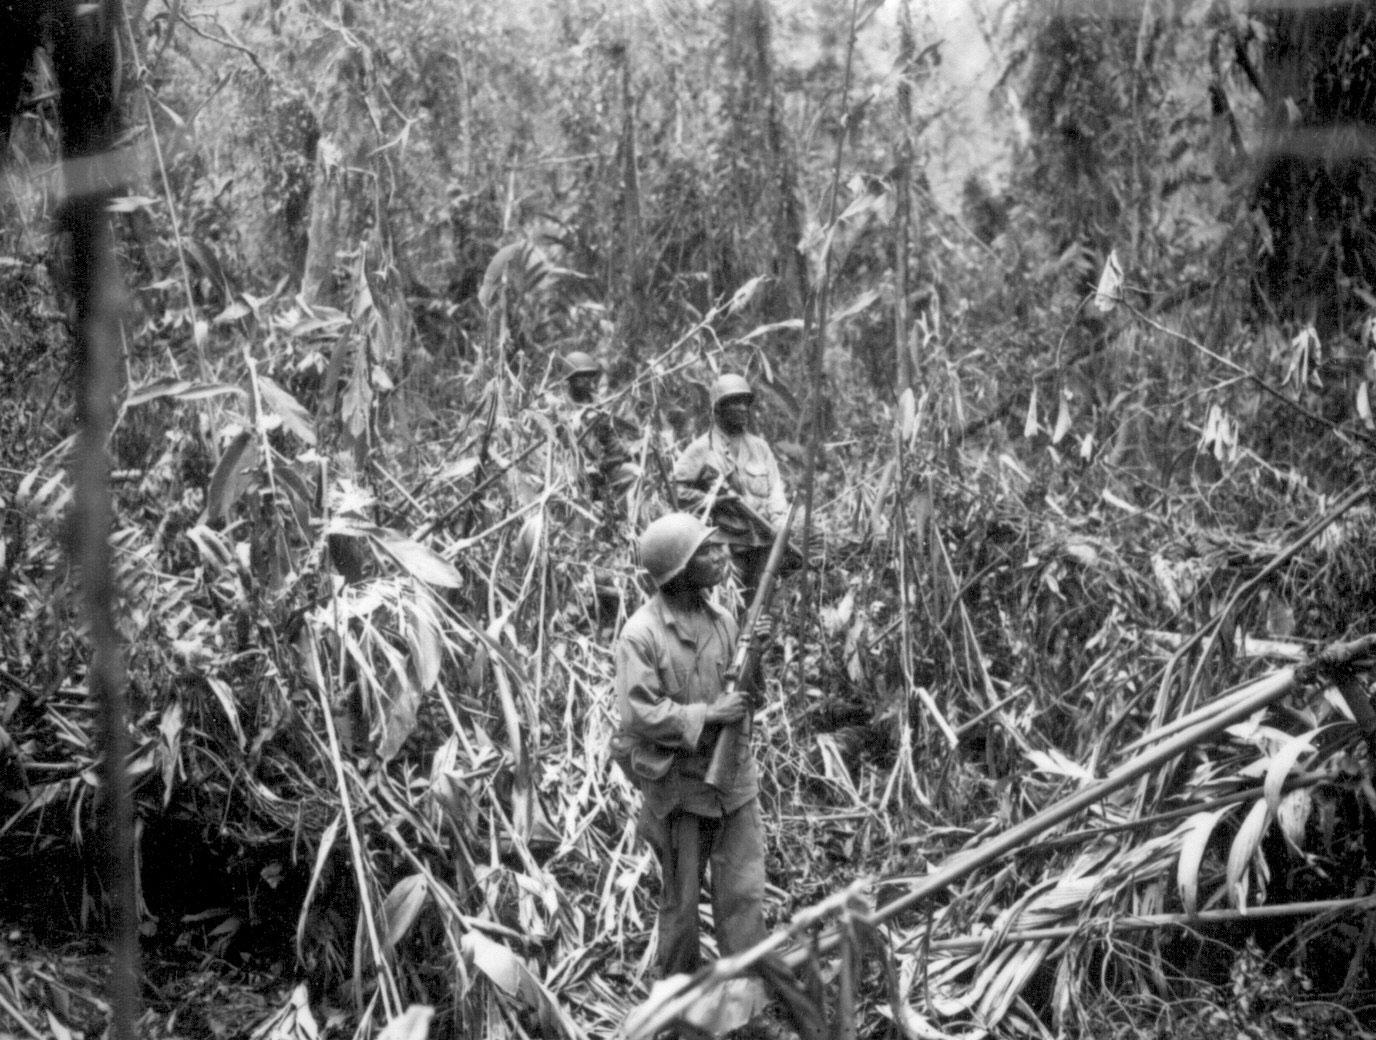 Three African American soldiers holding rifles and walking amongst tall grass and brush